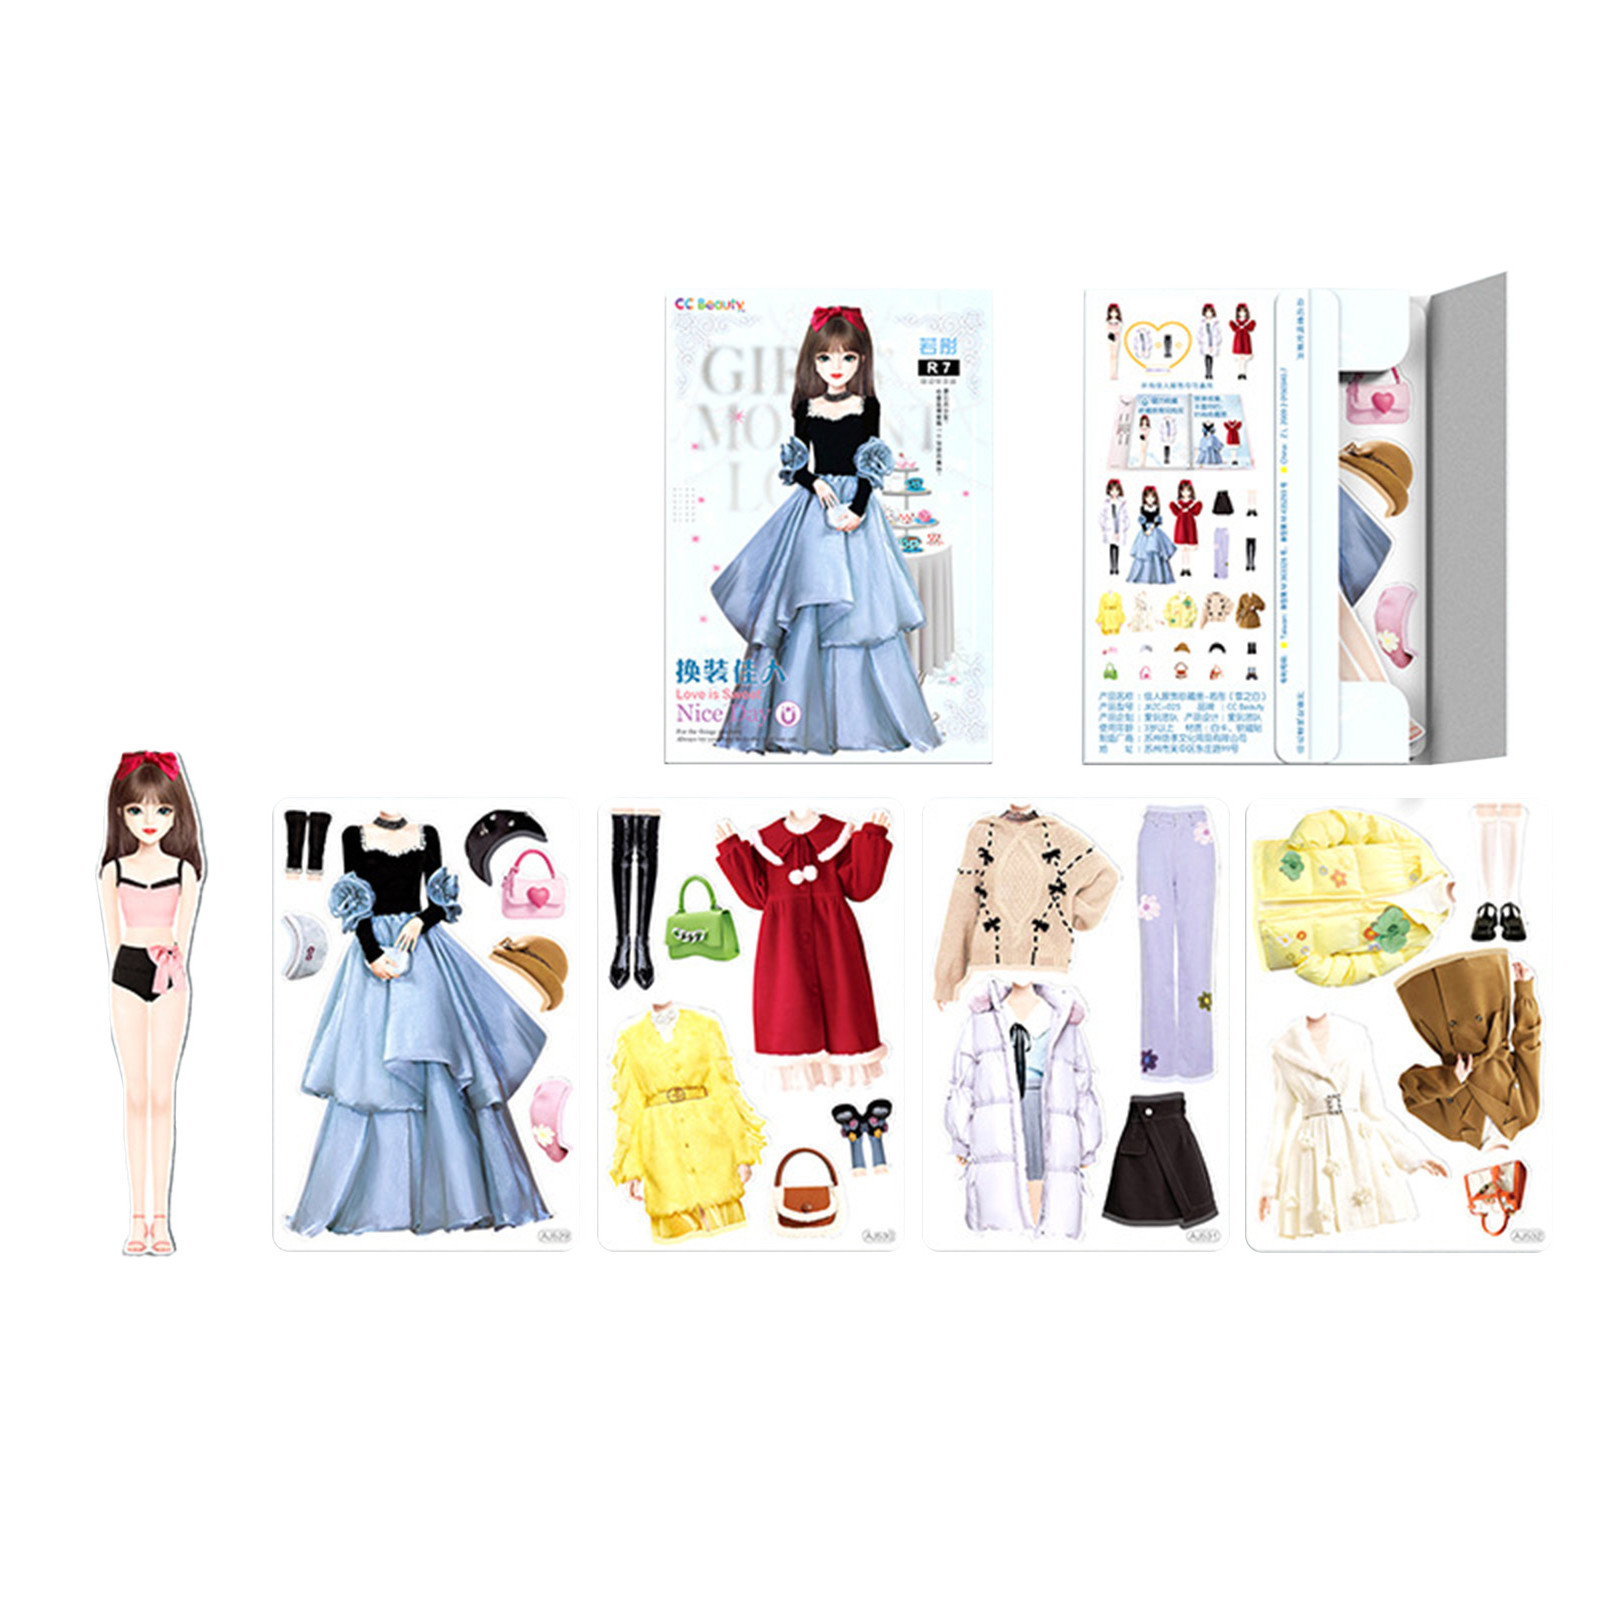 Loyerfyivos Magnetic Princess Dress Up Paper Doll Pretend Play Game, Travel Toys Car Road Trip,Magnet Clothes Puzzles for Kids Toddler Girls,Preschool Learning Created Imagine Set Birthday Gift - image 1 of 5